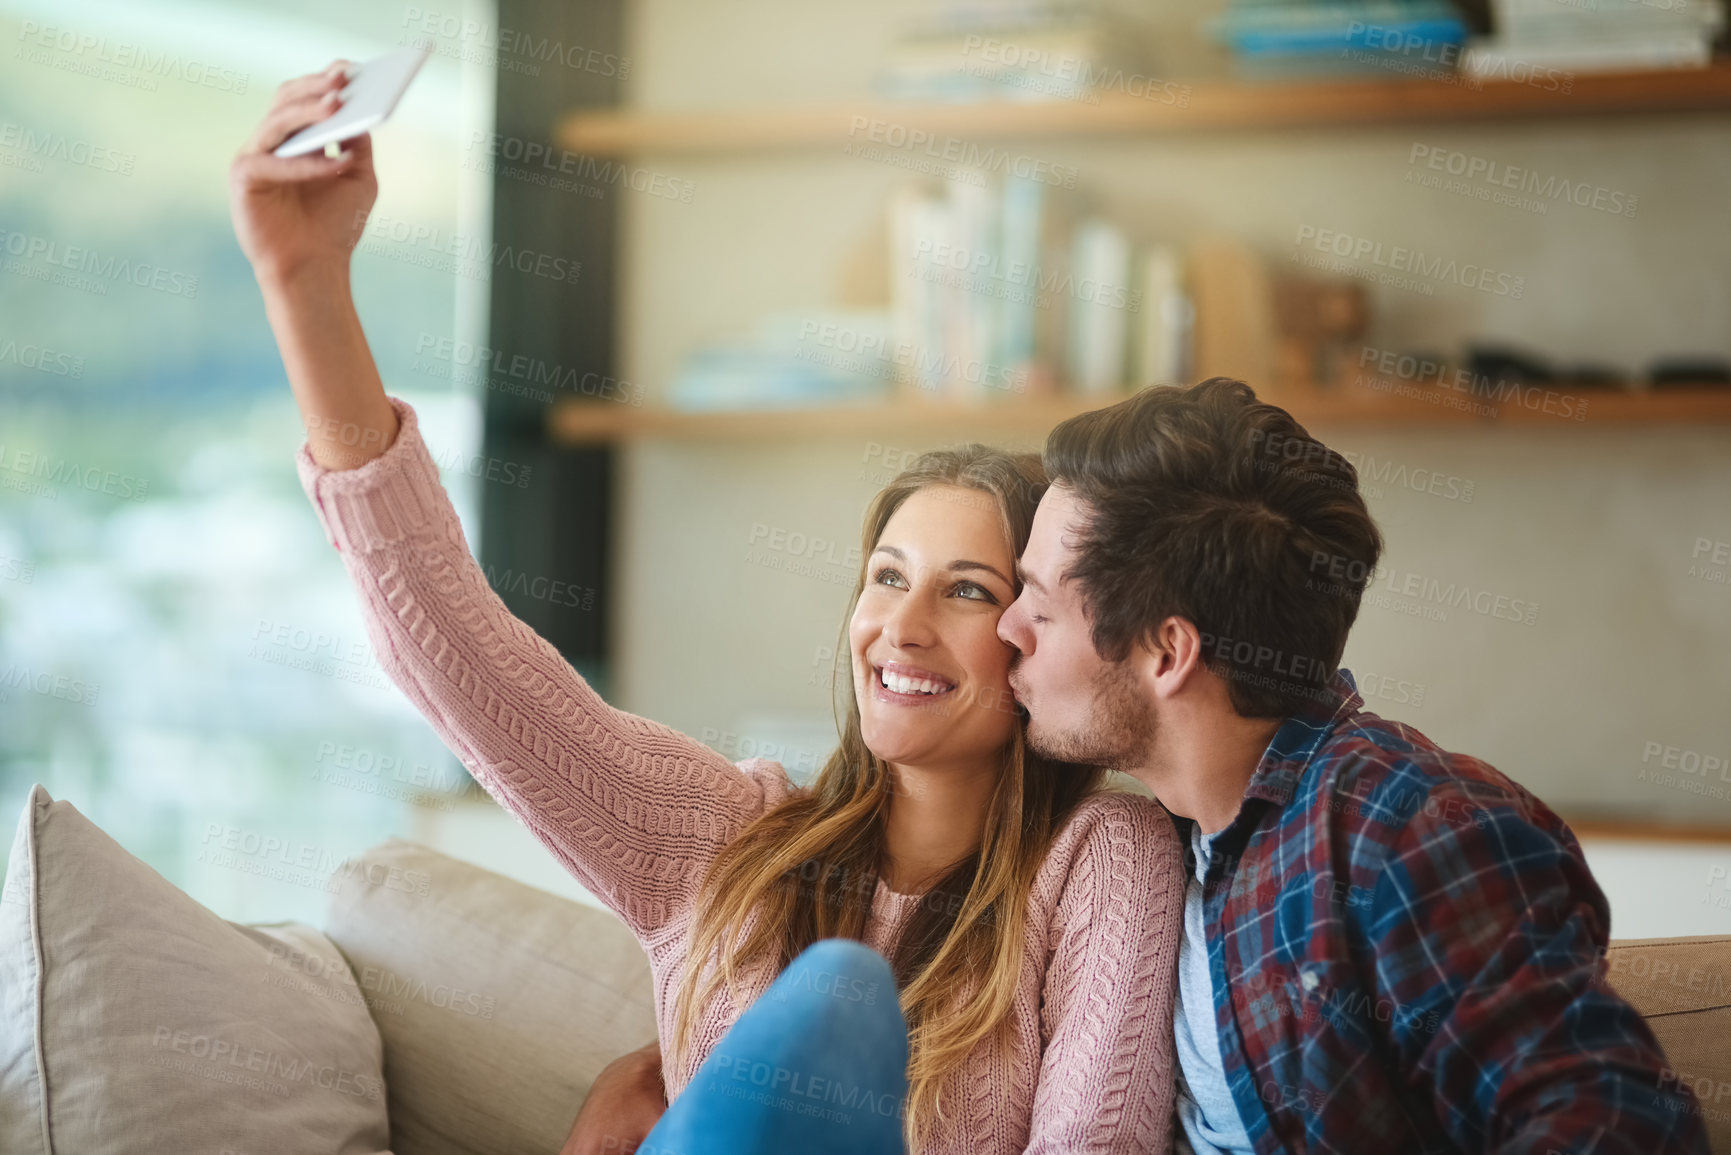 Buy stock photo Shot of a happy young couple taking a selfie with a smartphone while sitting on their couch at home